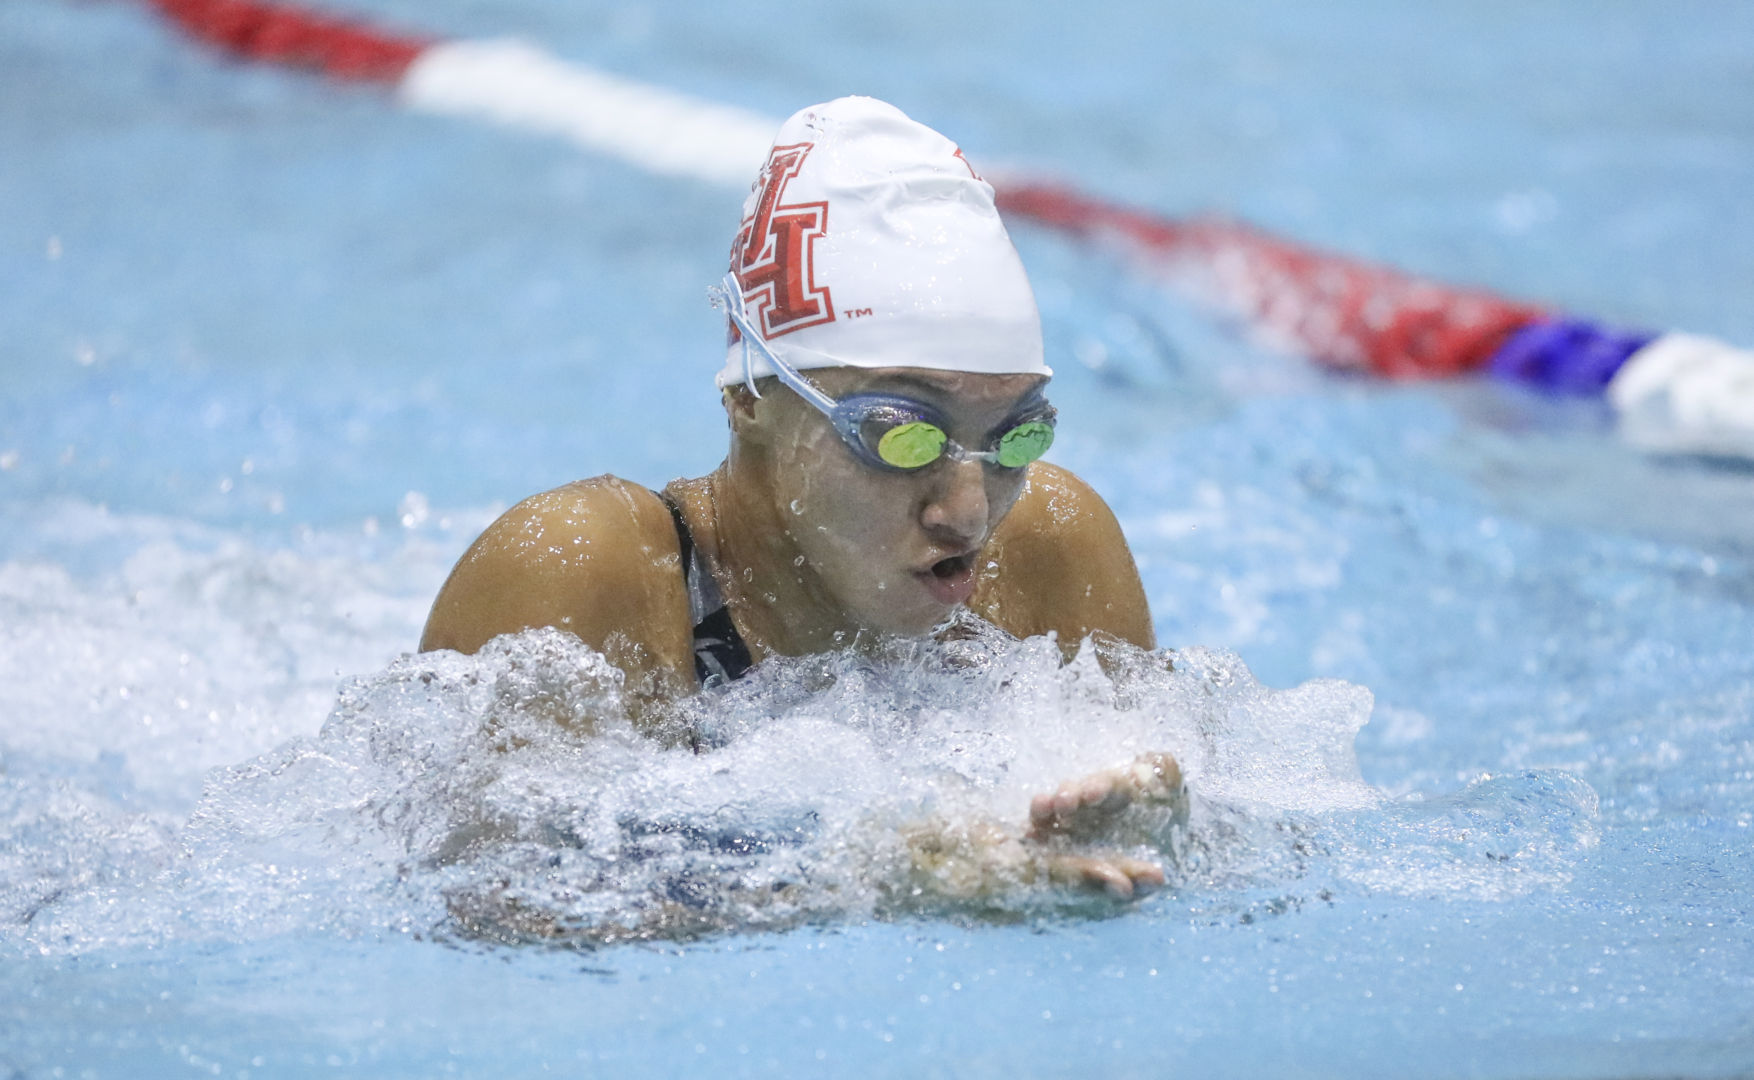 Senior Peyton Kondis had her career cut short due to the coronavirus pandemic, which likely ended her chances at competing in the Olympic trials. | Courtesy of UH athletics